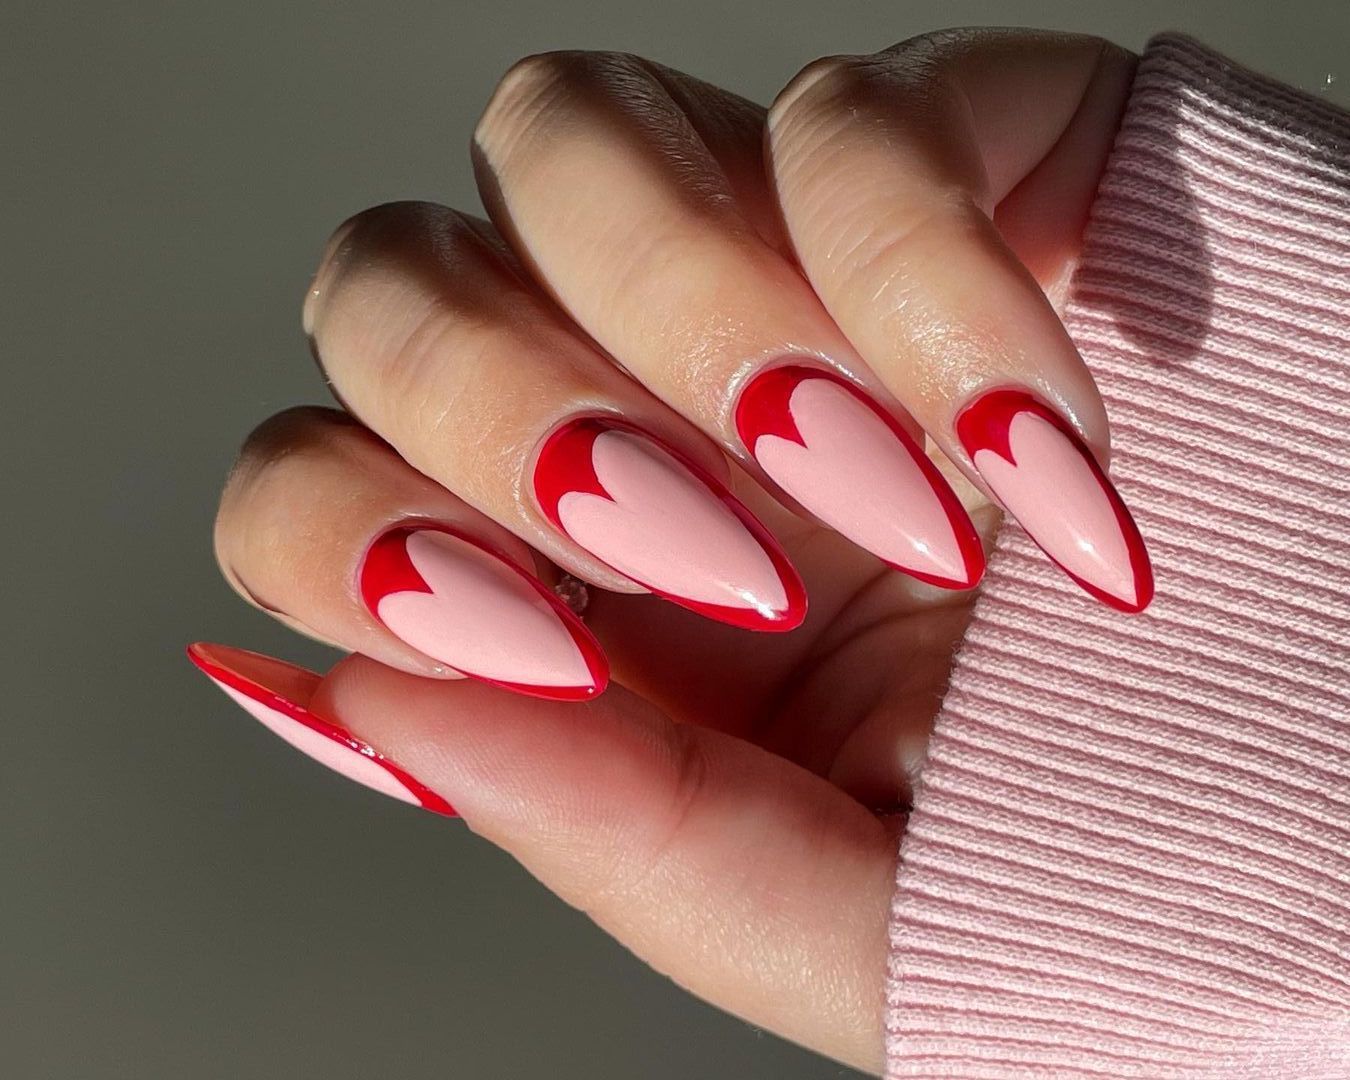 Nail Designs That Will Make You Fall in Love This Valentine's Day